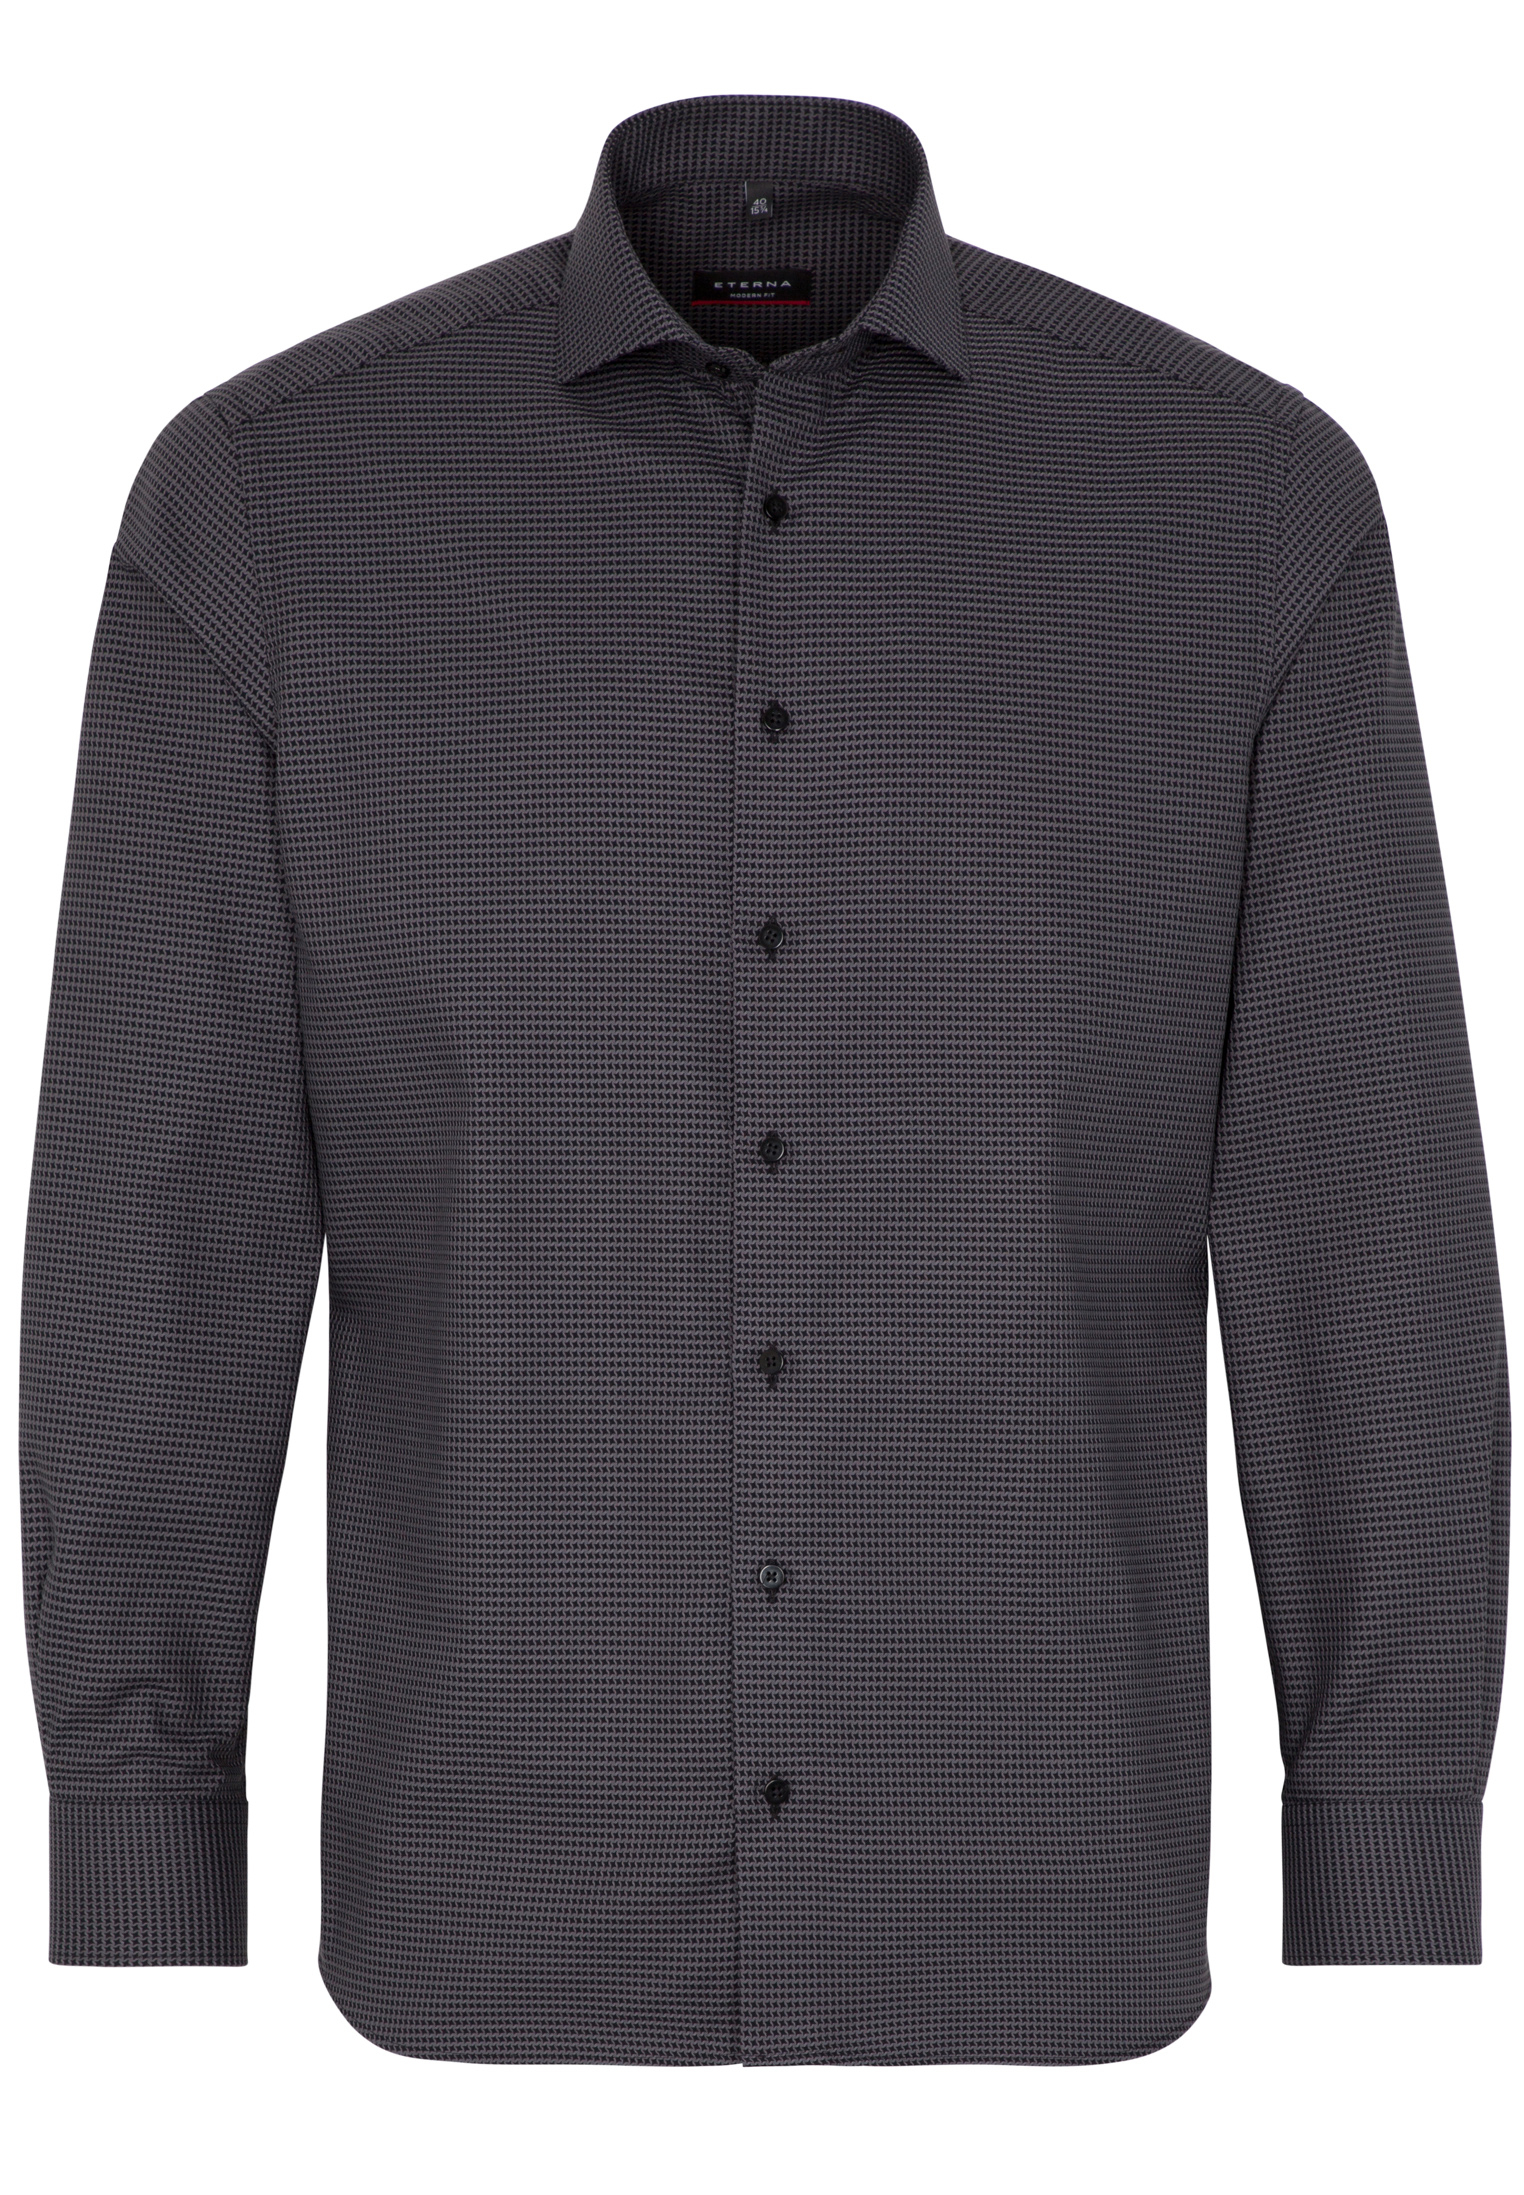 MODERN FIT Shirt in black structured